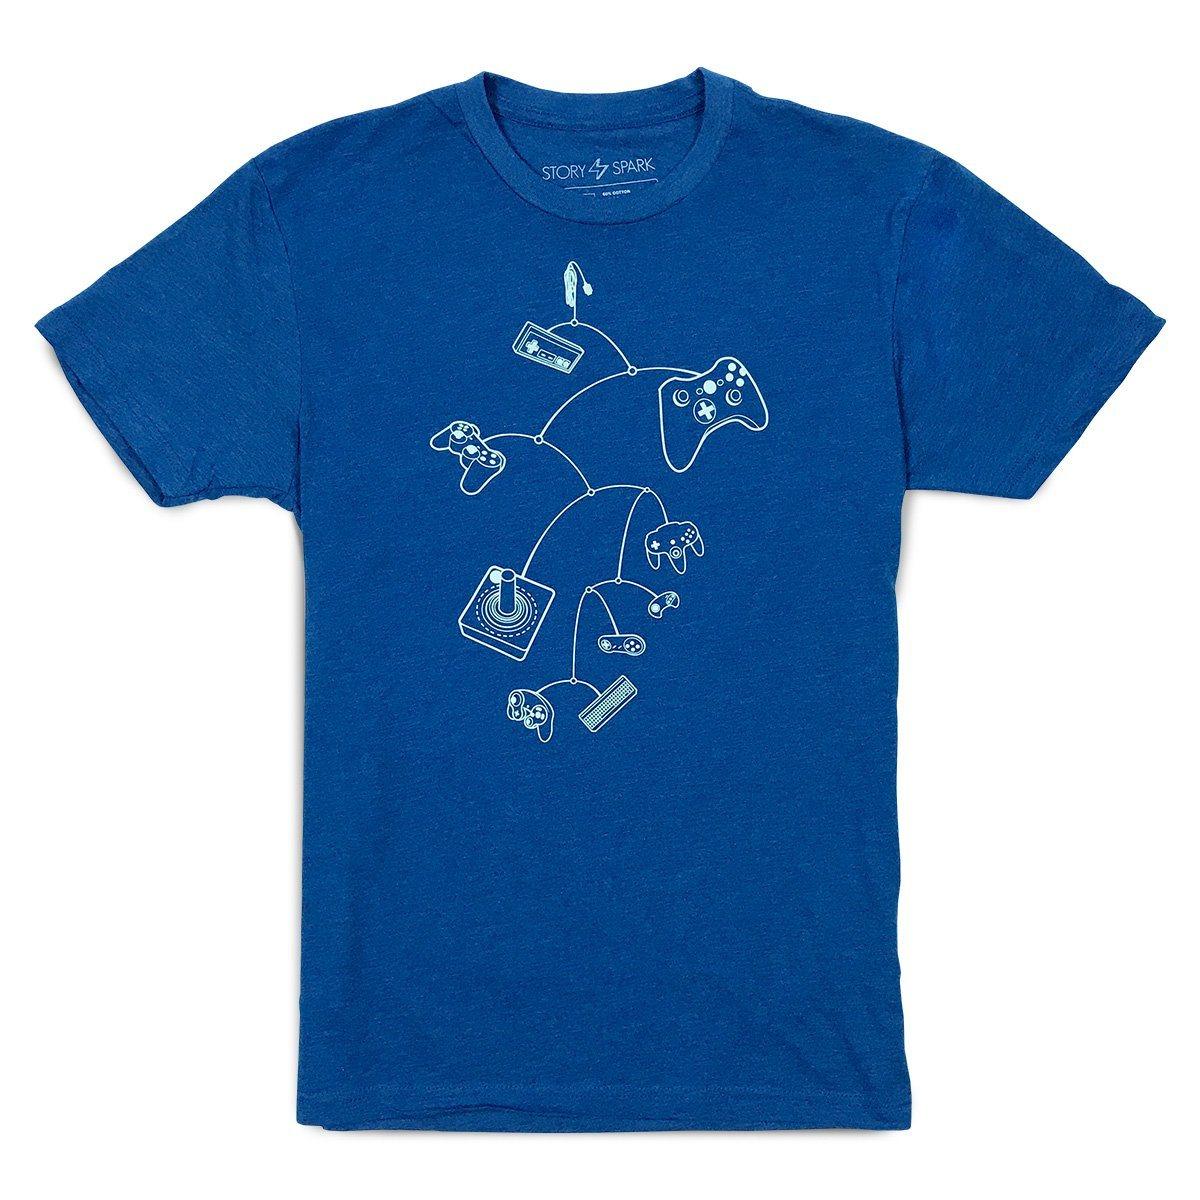 graphic tee with royal blue